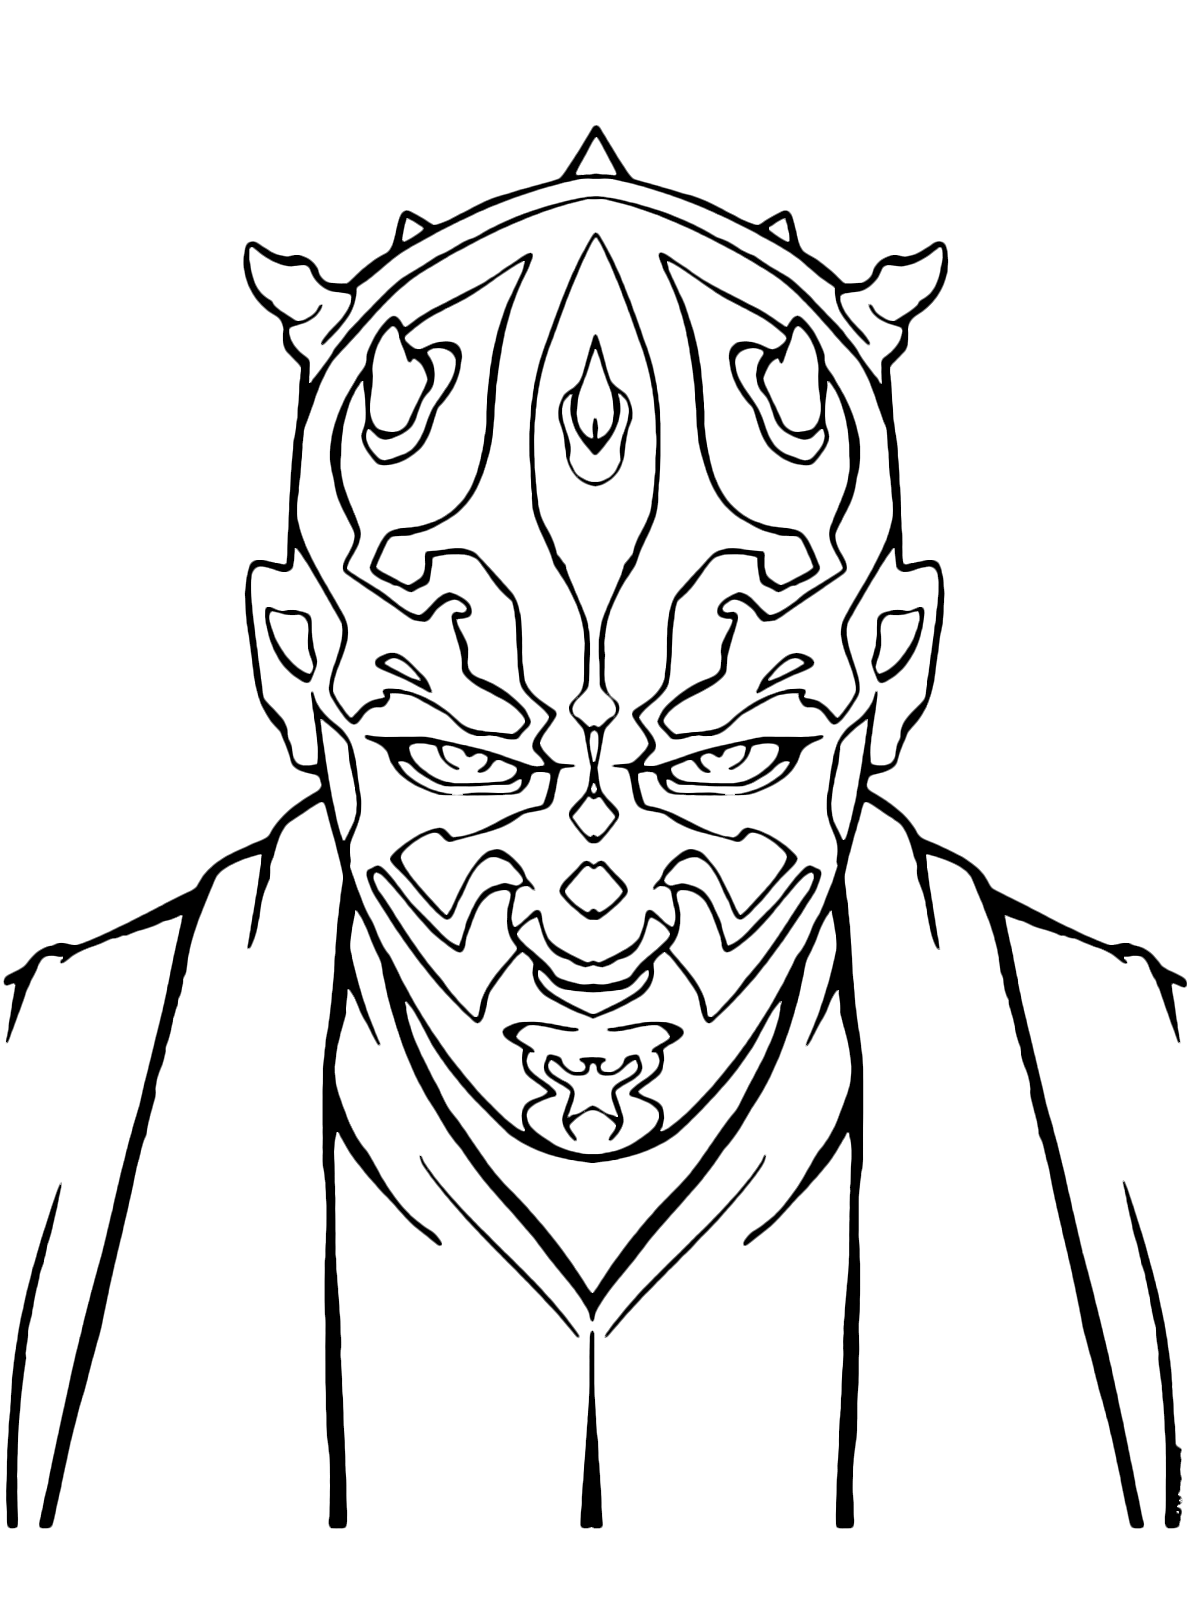 Darth Maul Star Wars Coloring Sheets Coloring Pages